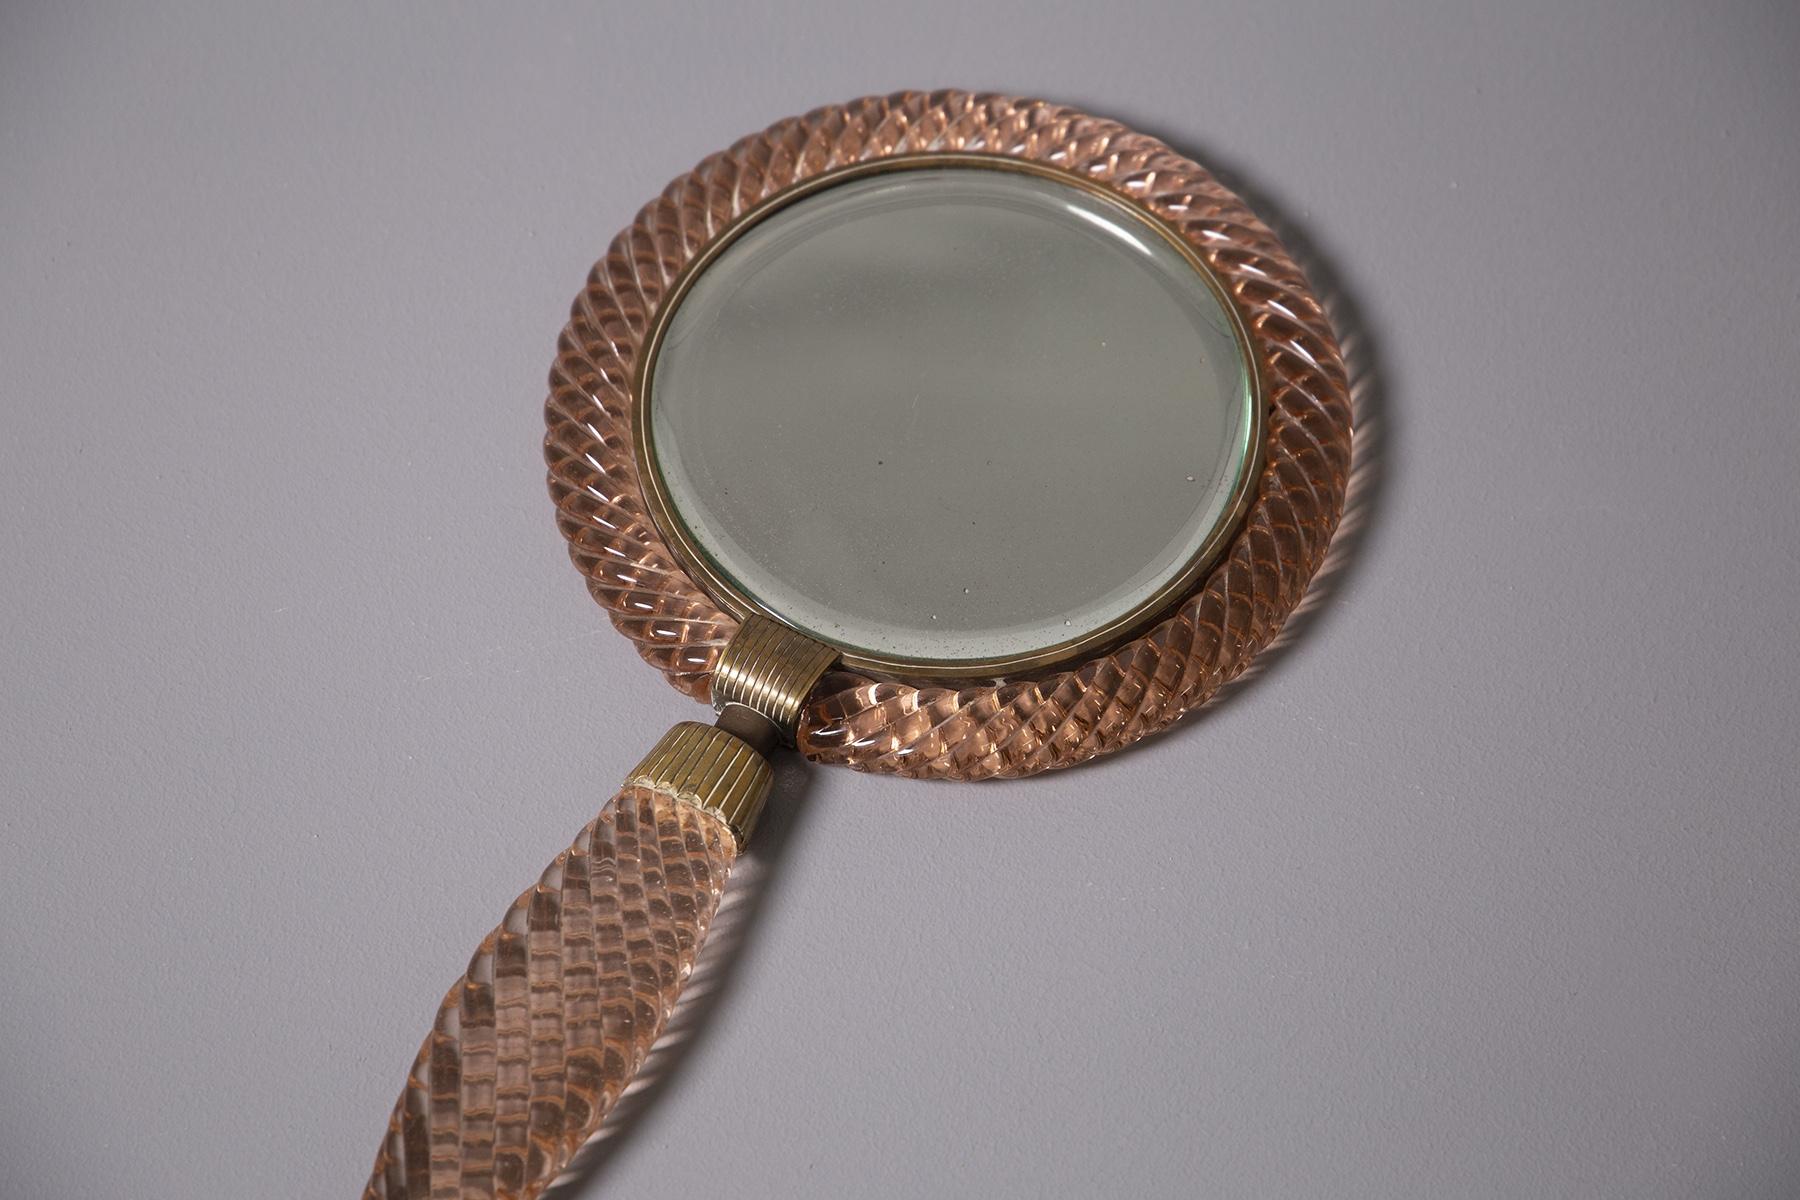 Rare and magnificent ladies' toilet mirror designed by Venini from 1939, Italy. The women's mirror is made in press or rather braided in antique pink Murano glass. Inside there is an antique circular mirror. Its connecting elements are in worked